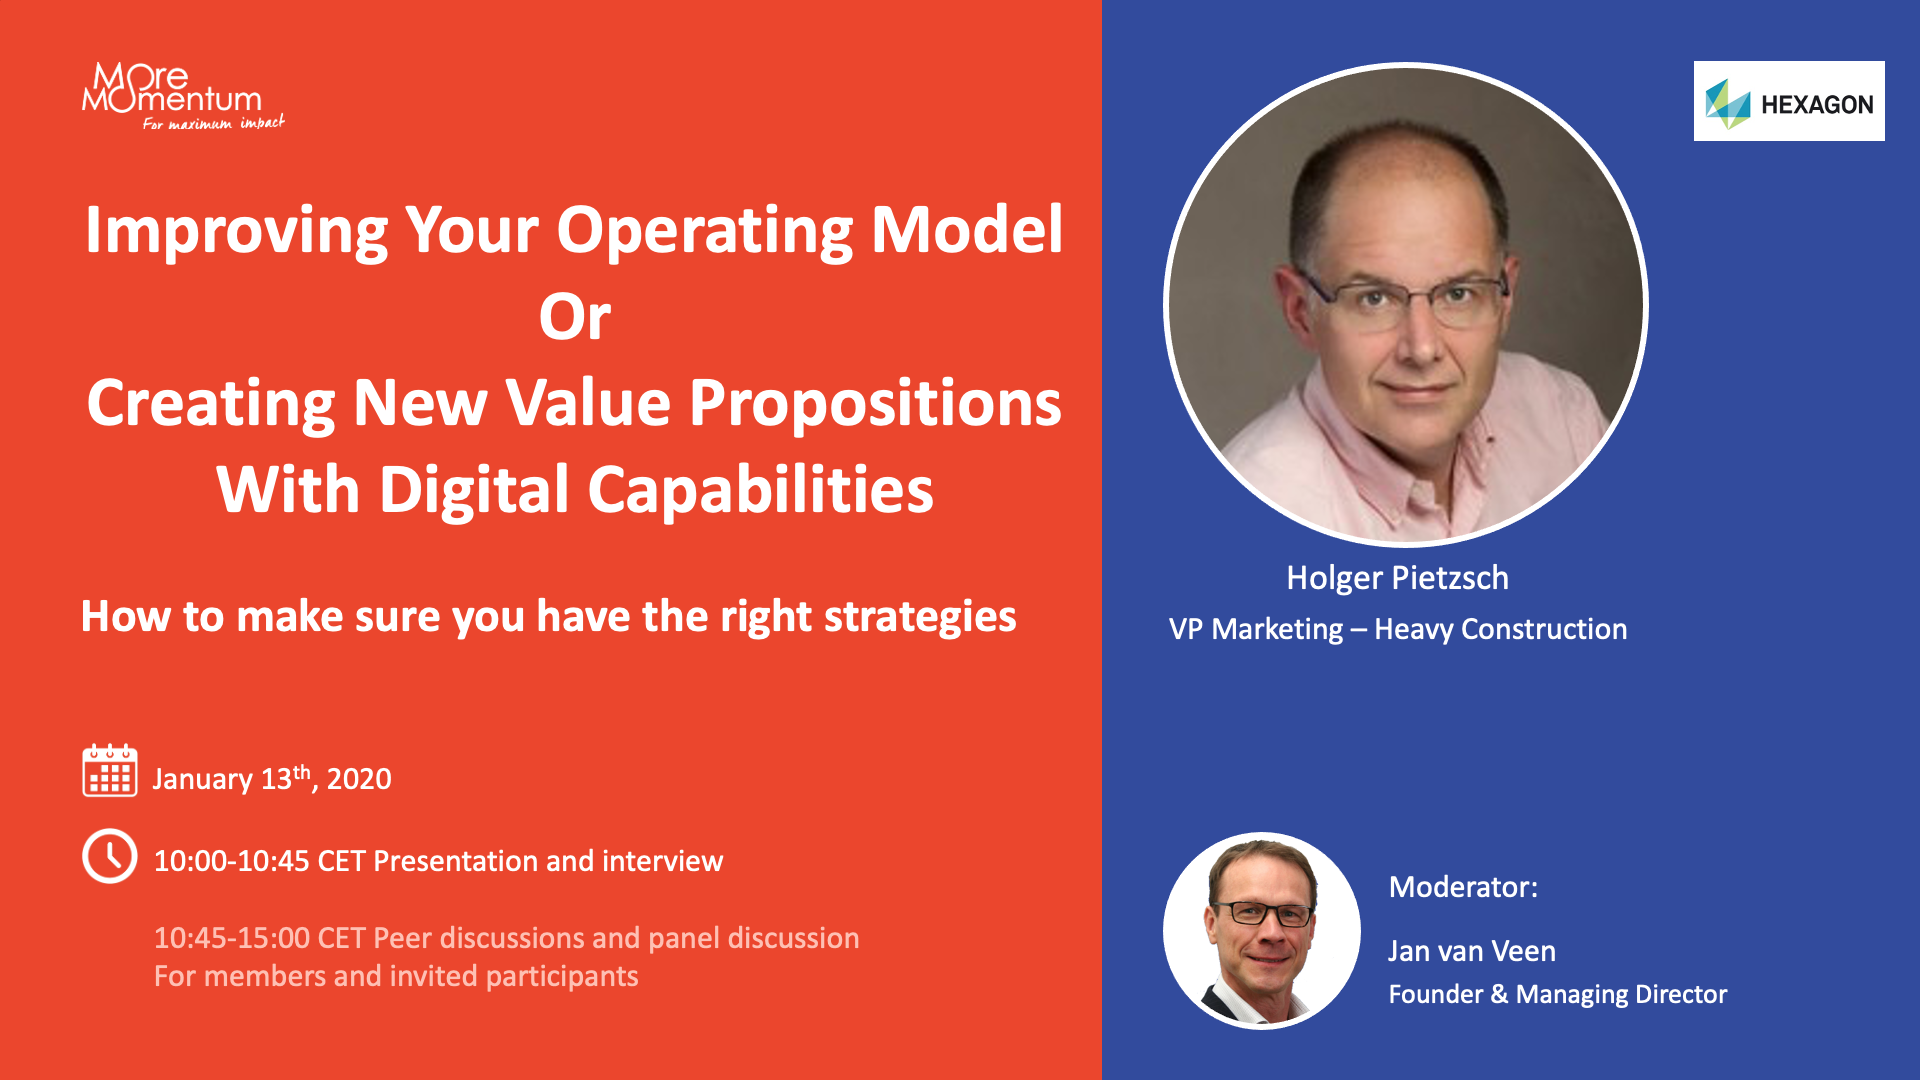 Digital Capabilities: Improvingng your operating model or creating new value propositions